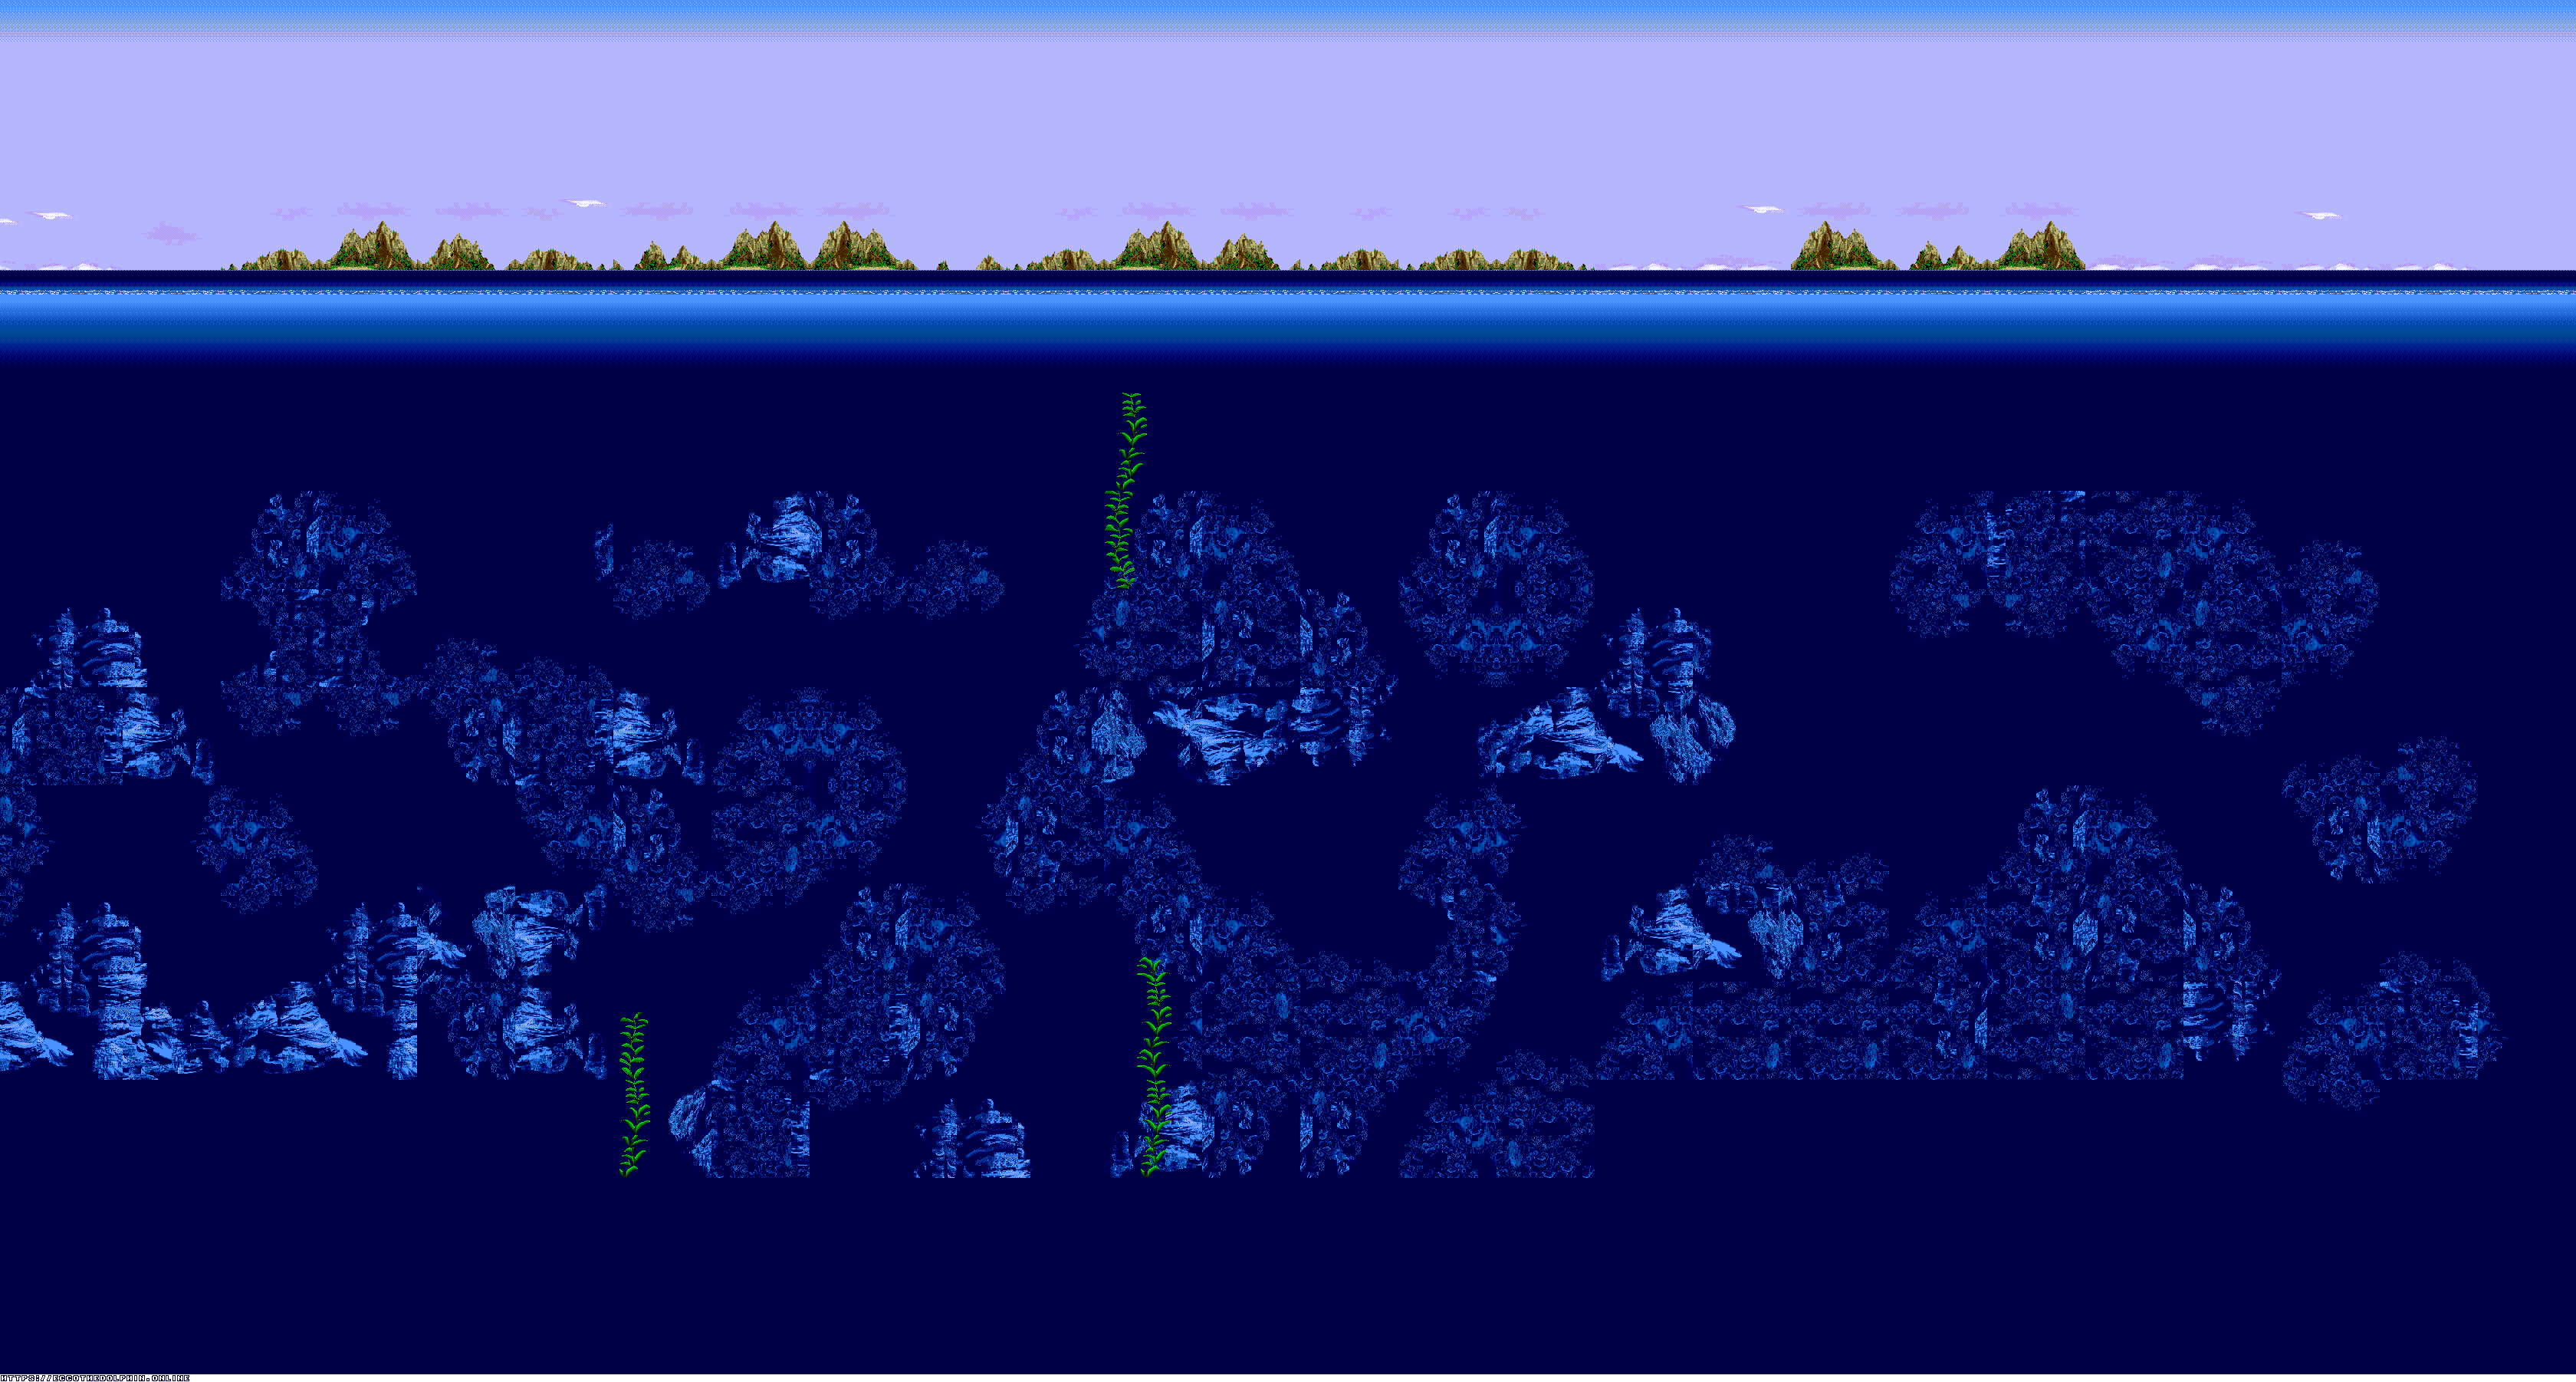 Ecco Jr. - The Sea of Music (Background)